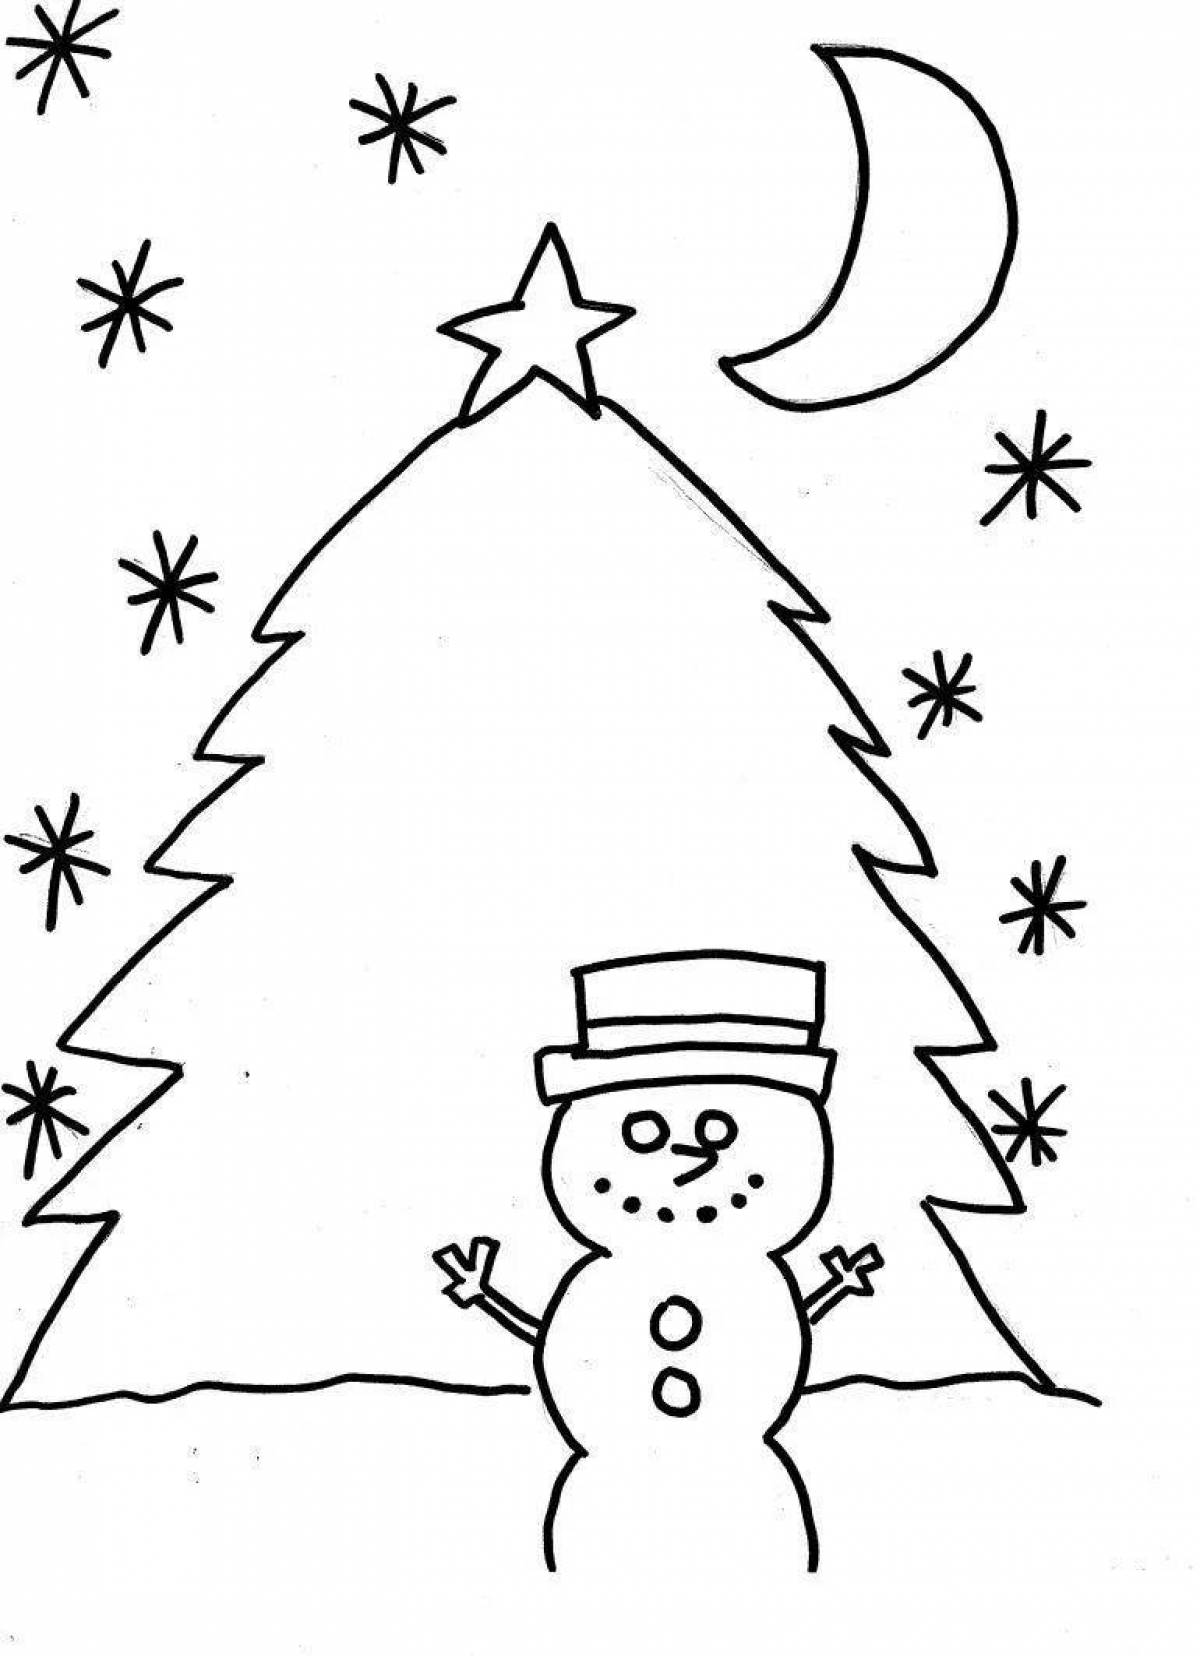 Amazing snowman coloring book